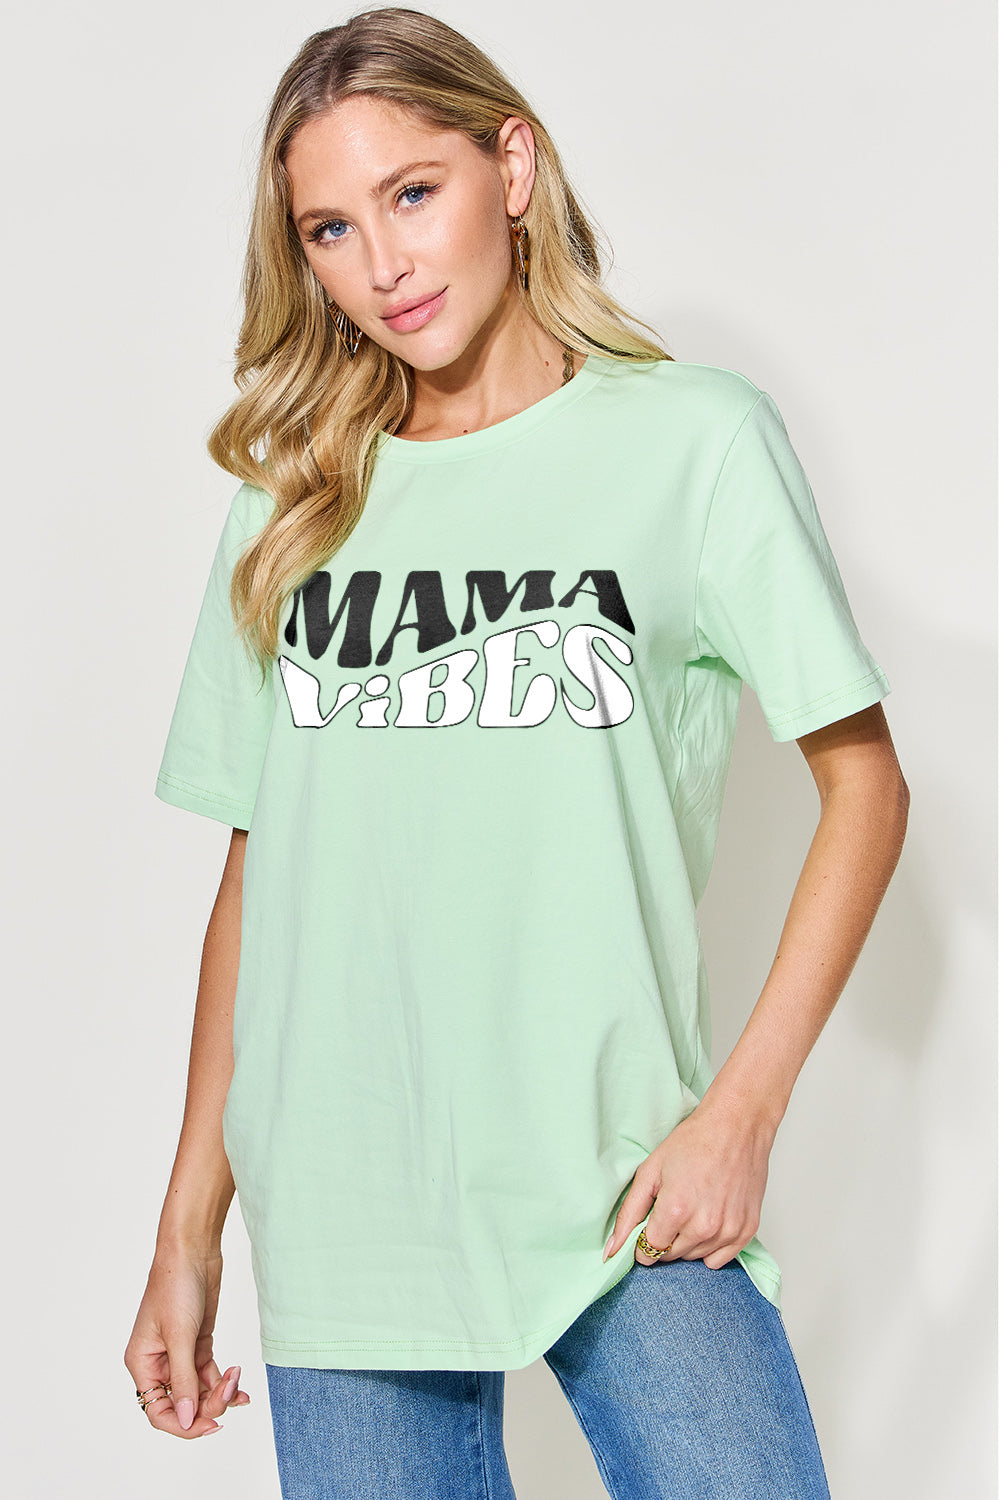 MAMA VIBES Graphic Tee *7 colors*